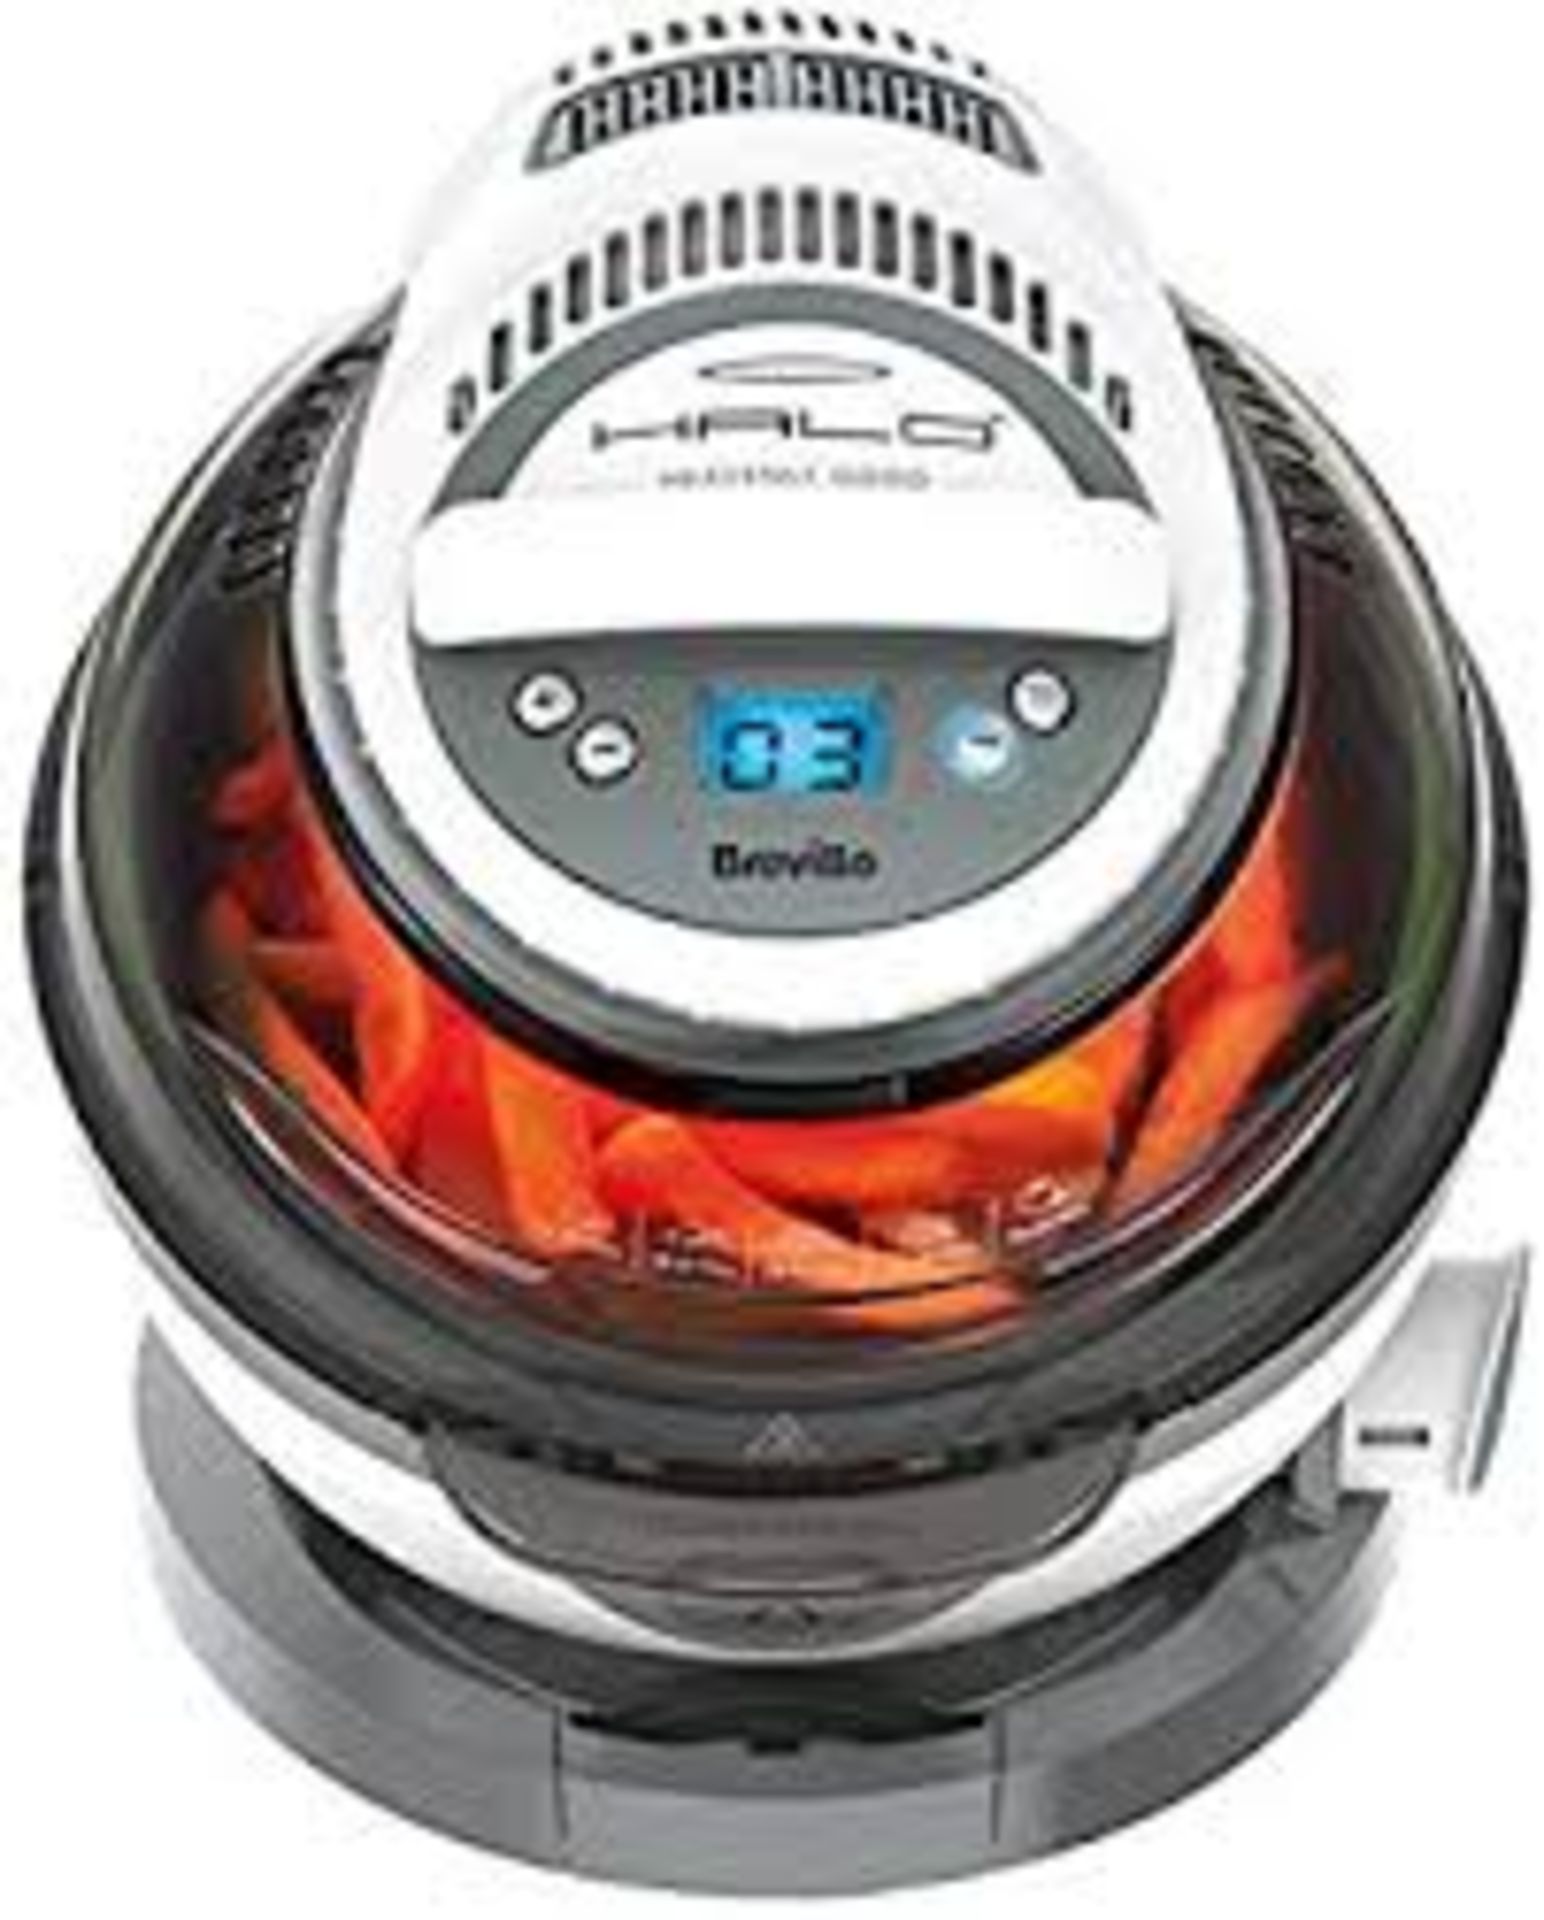 1 Boxed Breville Halo Plus Dura Cermaic Health Fryer With Rotating Bowl for Even Frying RRP £200